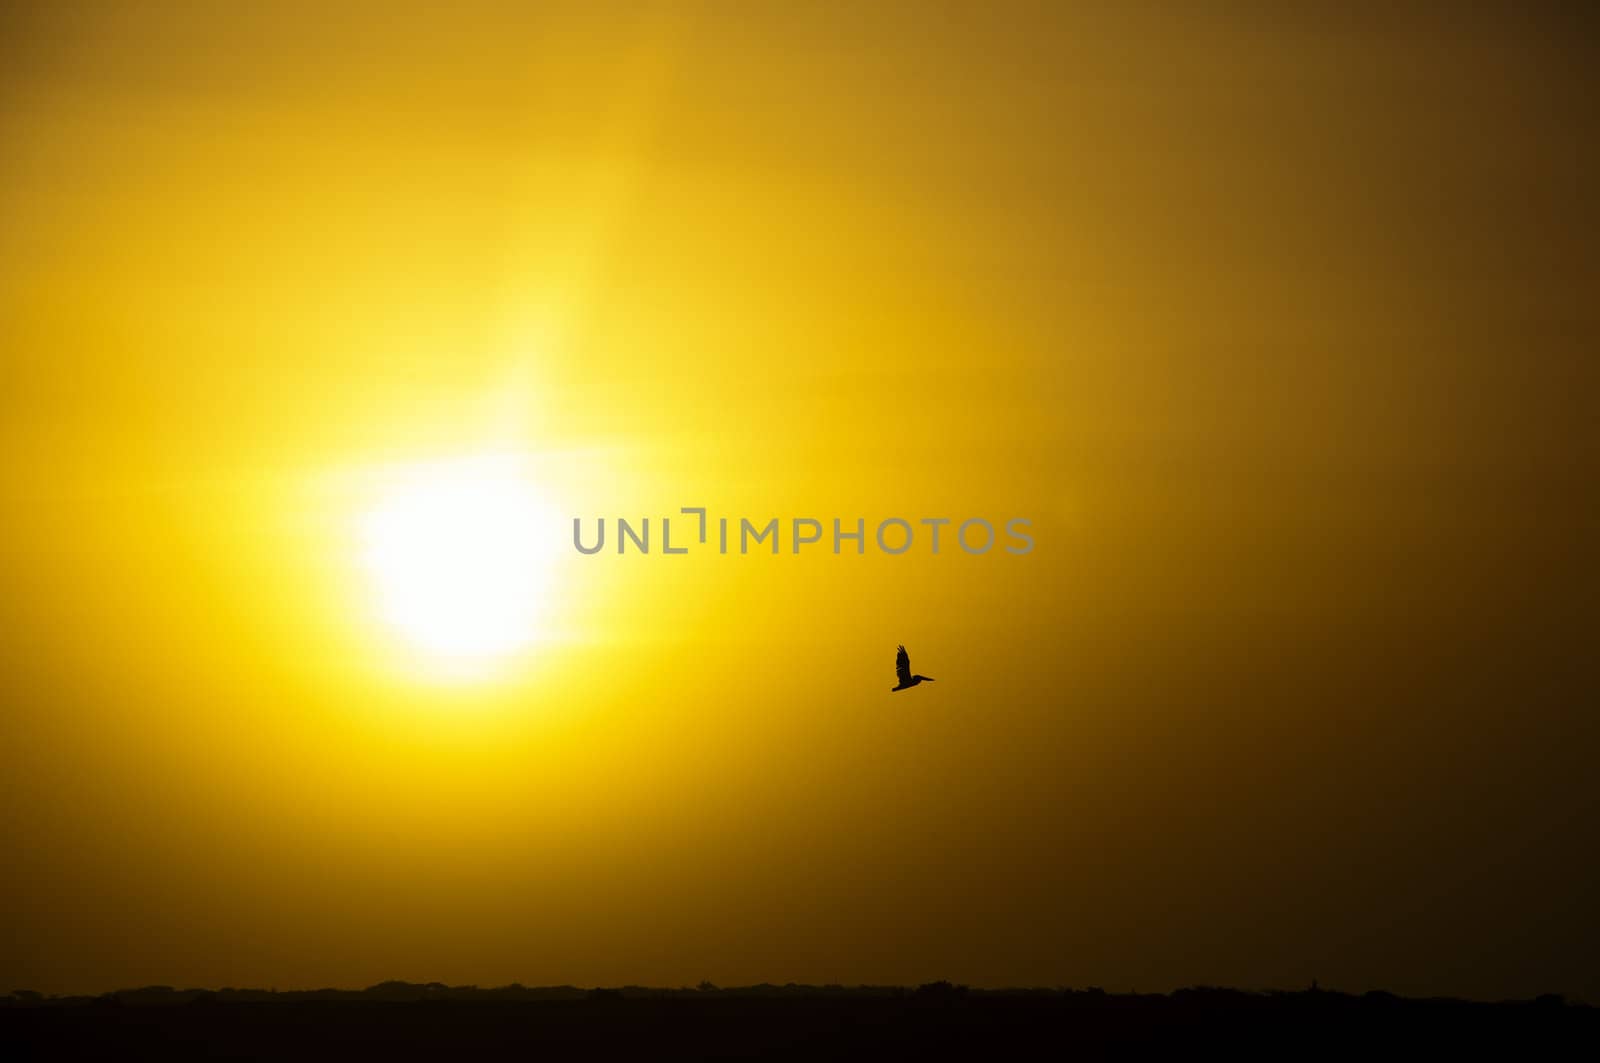 Silhouette of a pelican flying next to the sun.